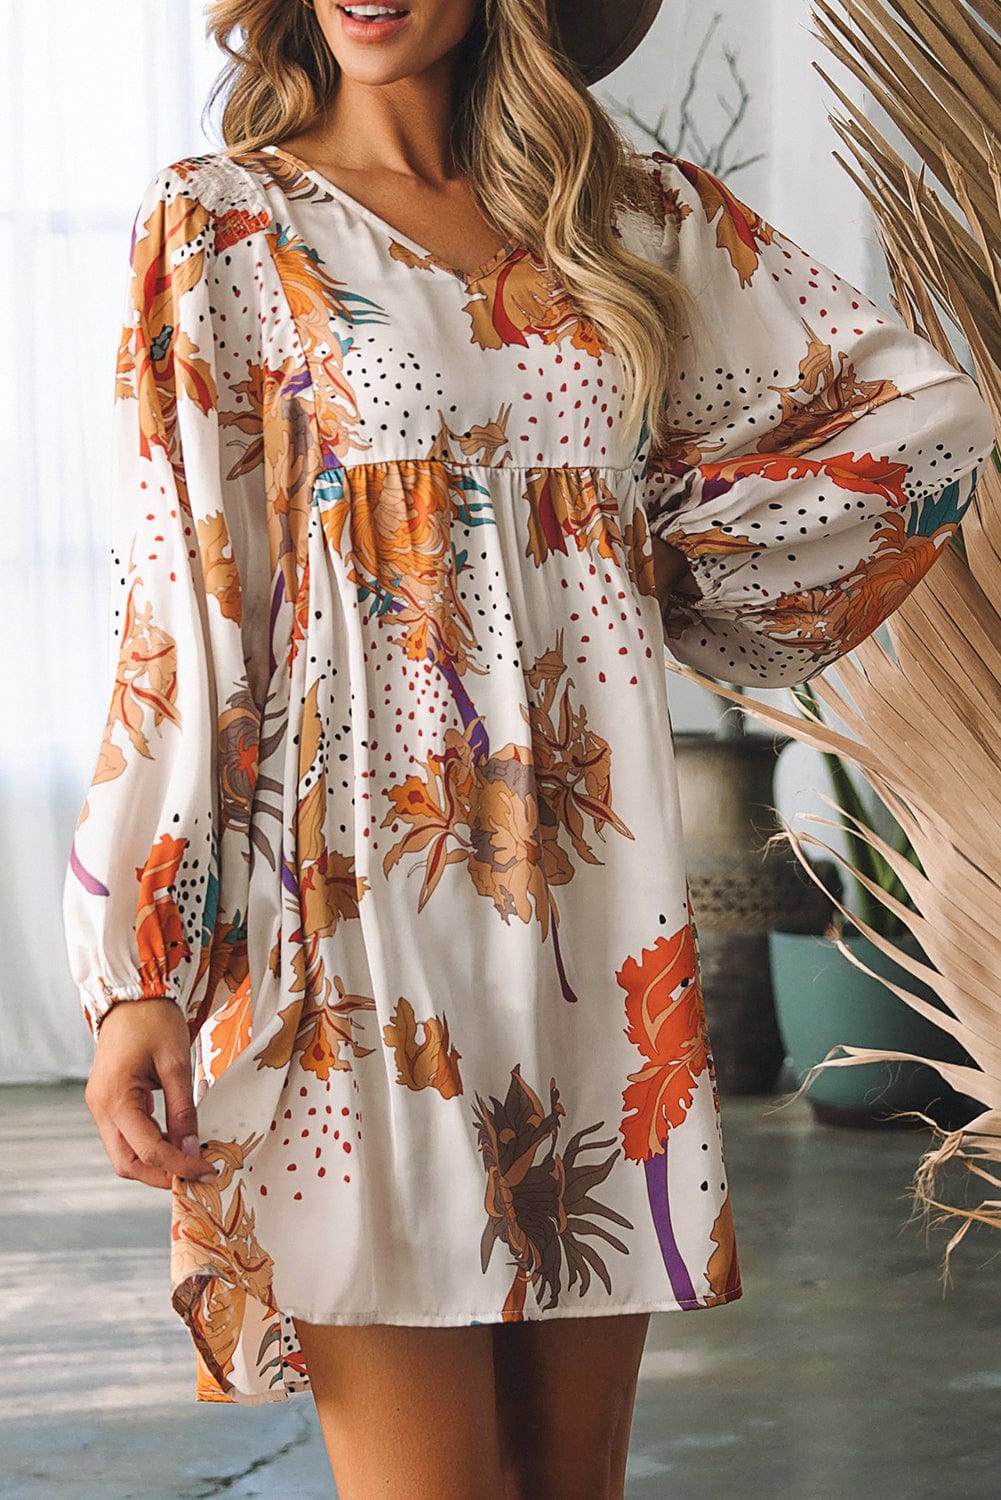 The802Gypsy  Dresses Multicolor / S / 100%Polyester TRAVELING GYPSY-Floral Empire Waist Shift Dress